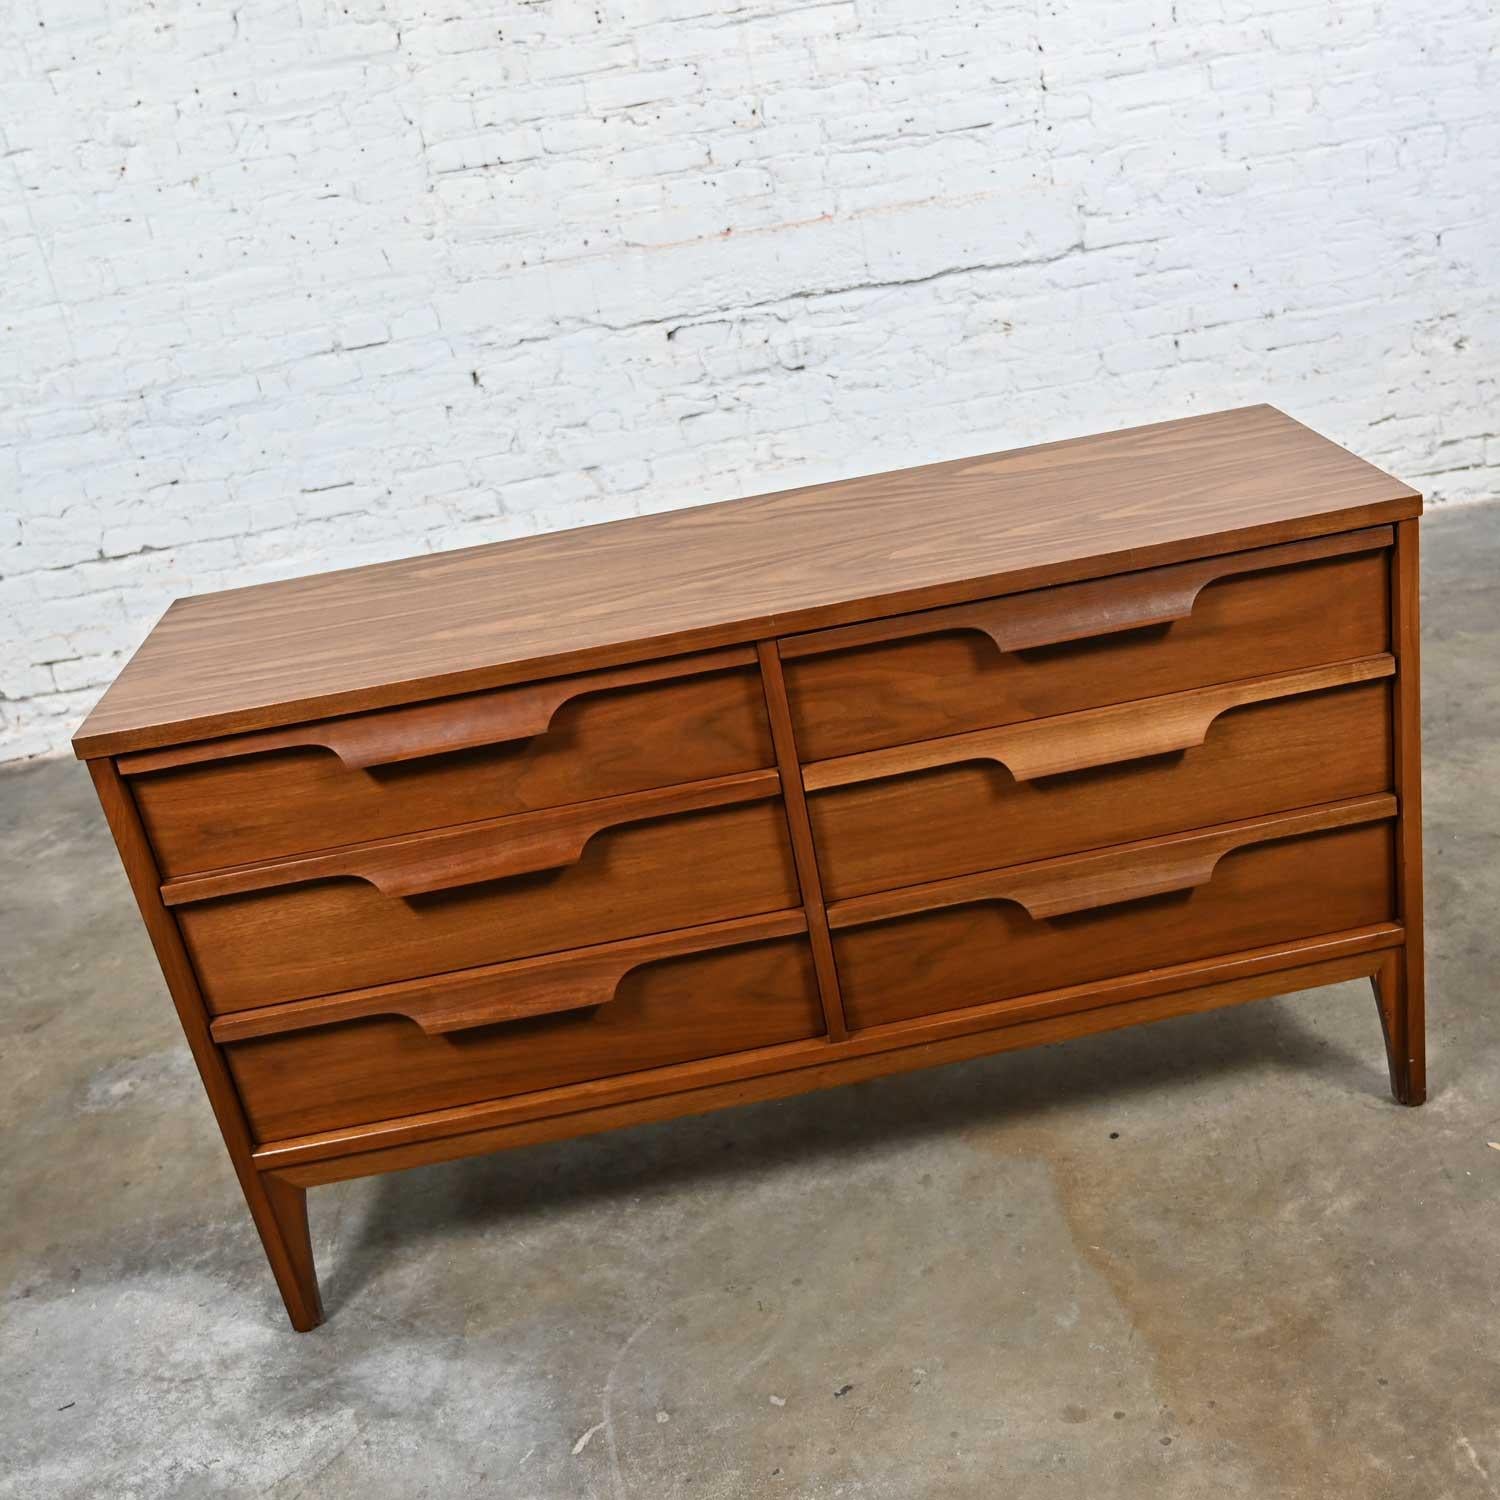 Gorgeous vintage mid-century modern Johnson Carper Fashion Trend six drawer walnut & veneer dresser with wood grain laminate top. This piece has been attributed based upon archived research including online sources, vintage documentation and